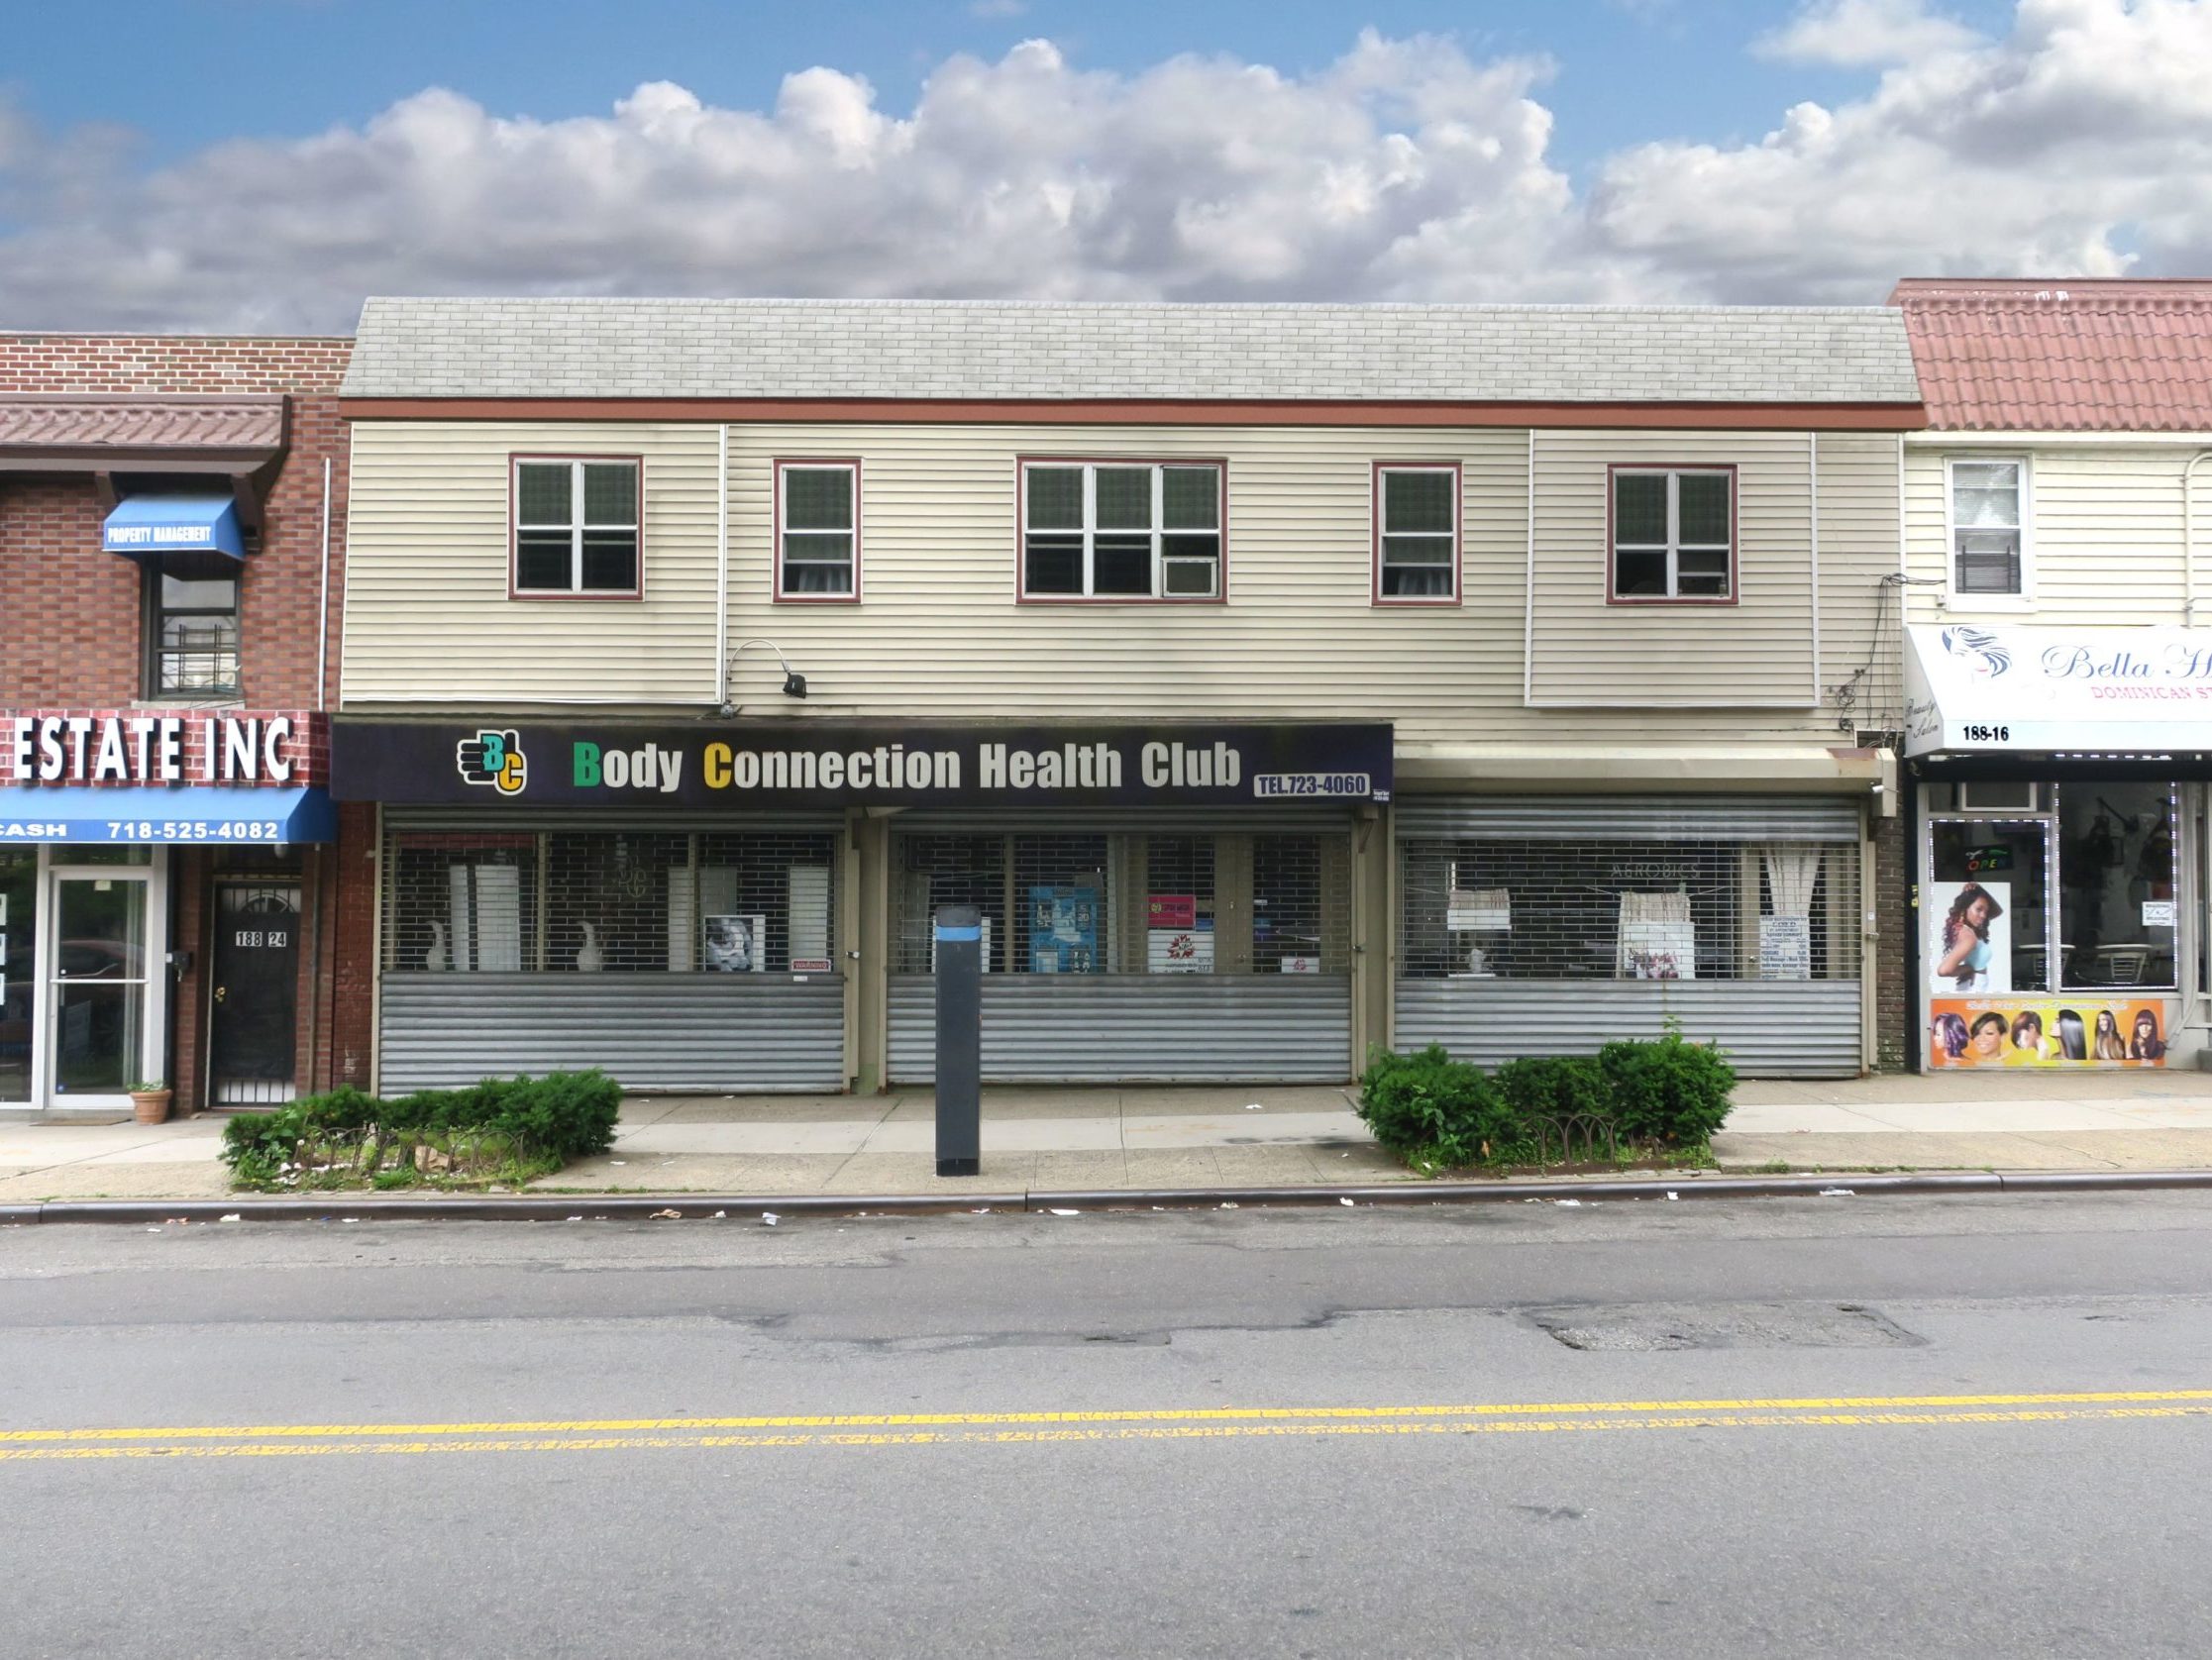 4,900+ SQ FT Mixed-Use Building - Maltz Auctions